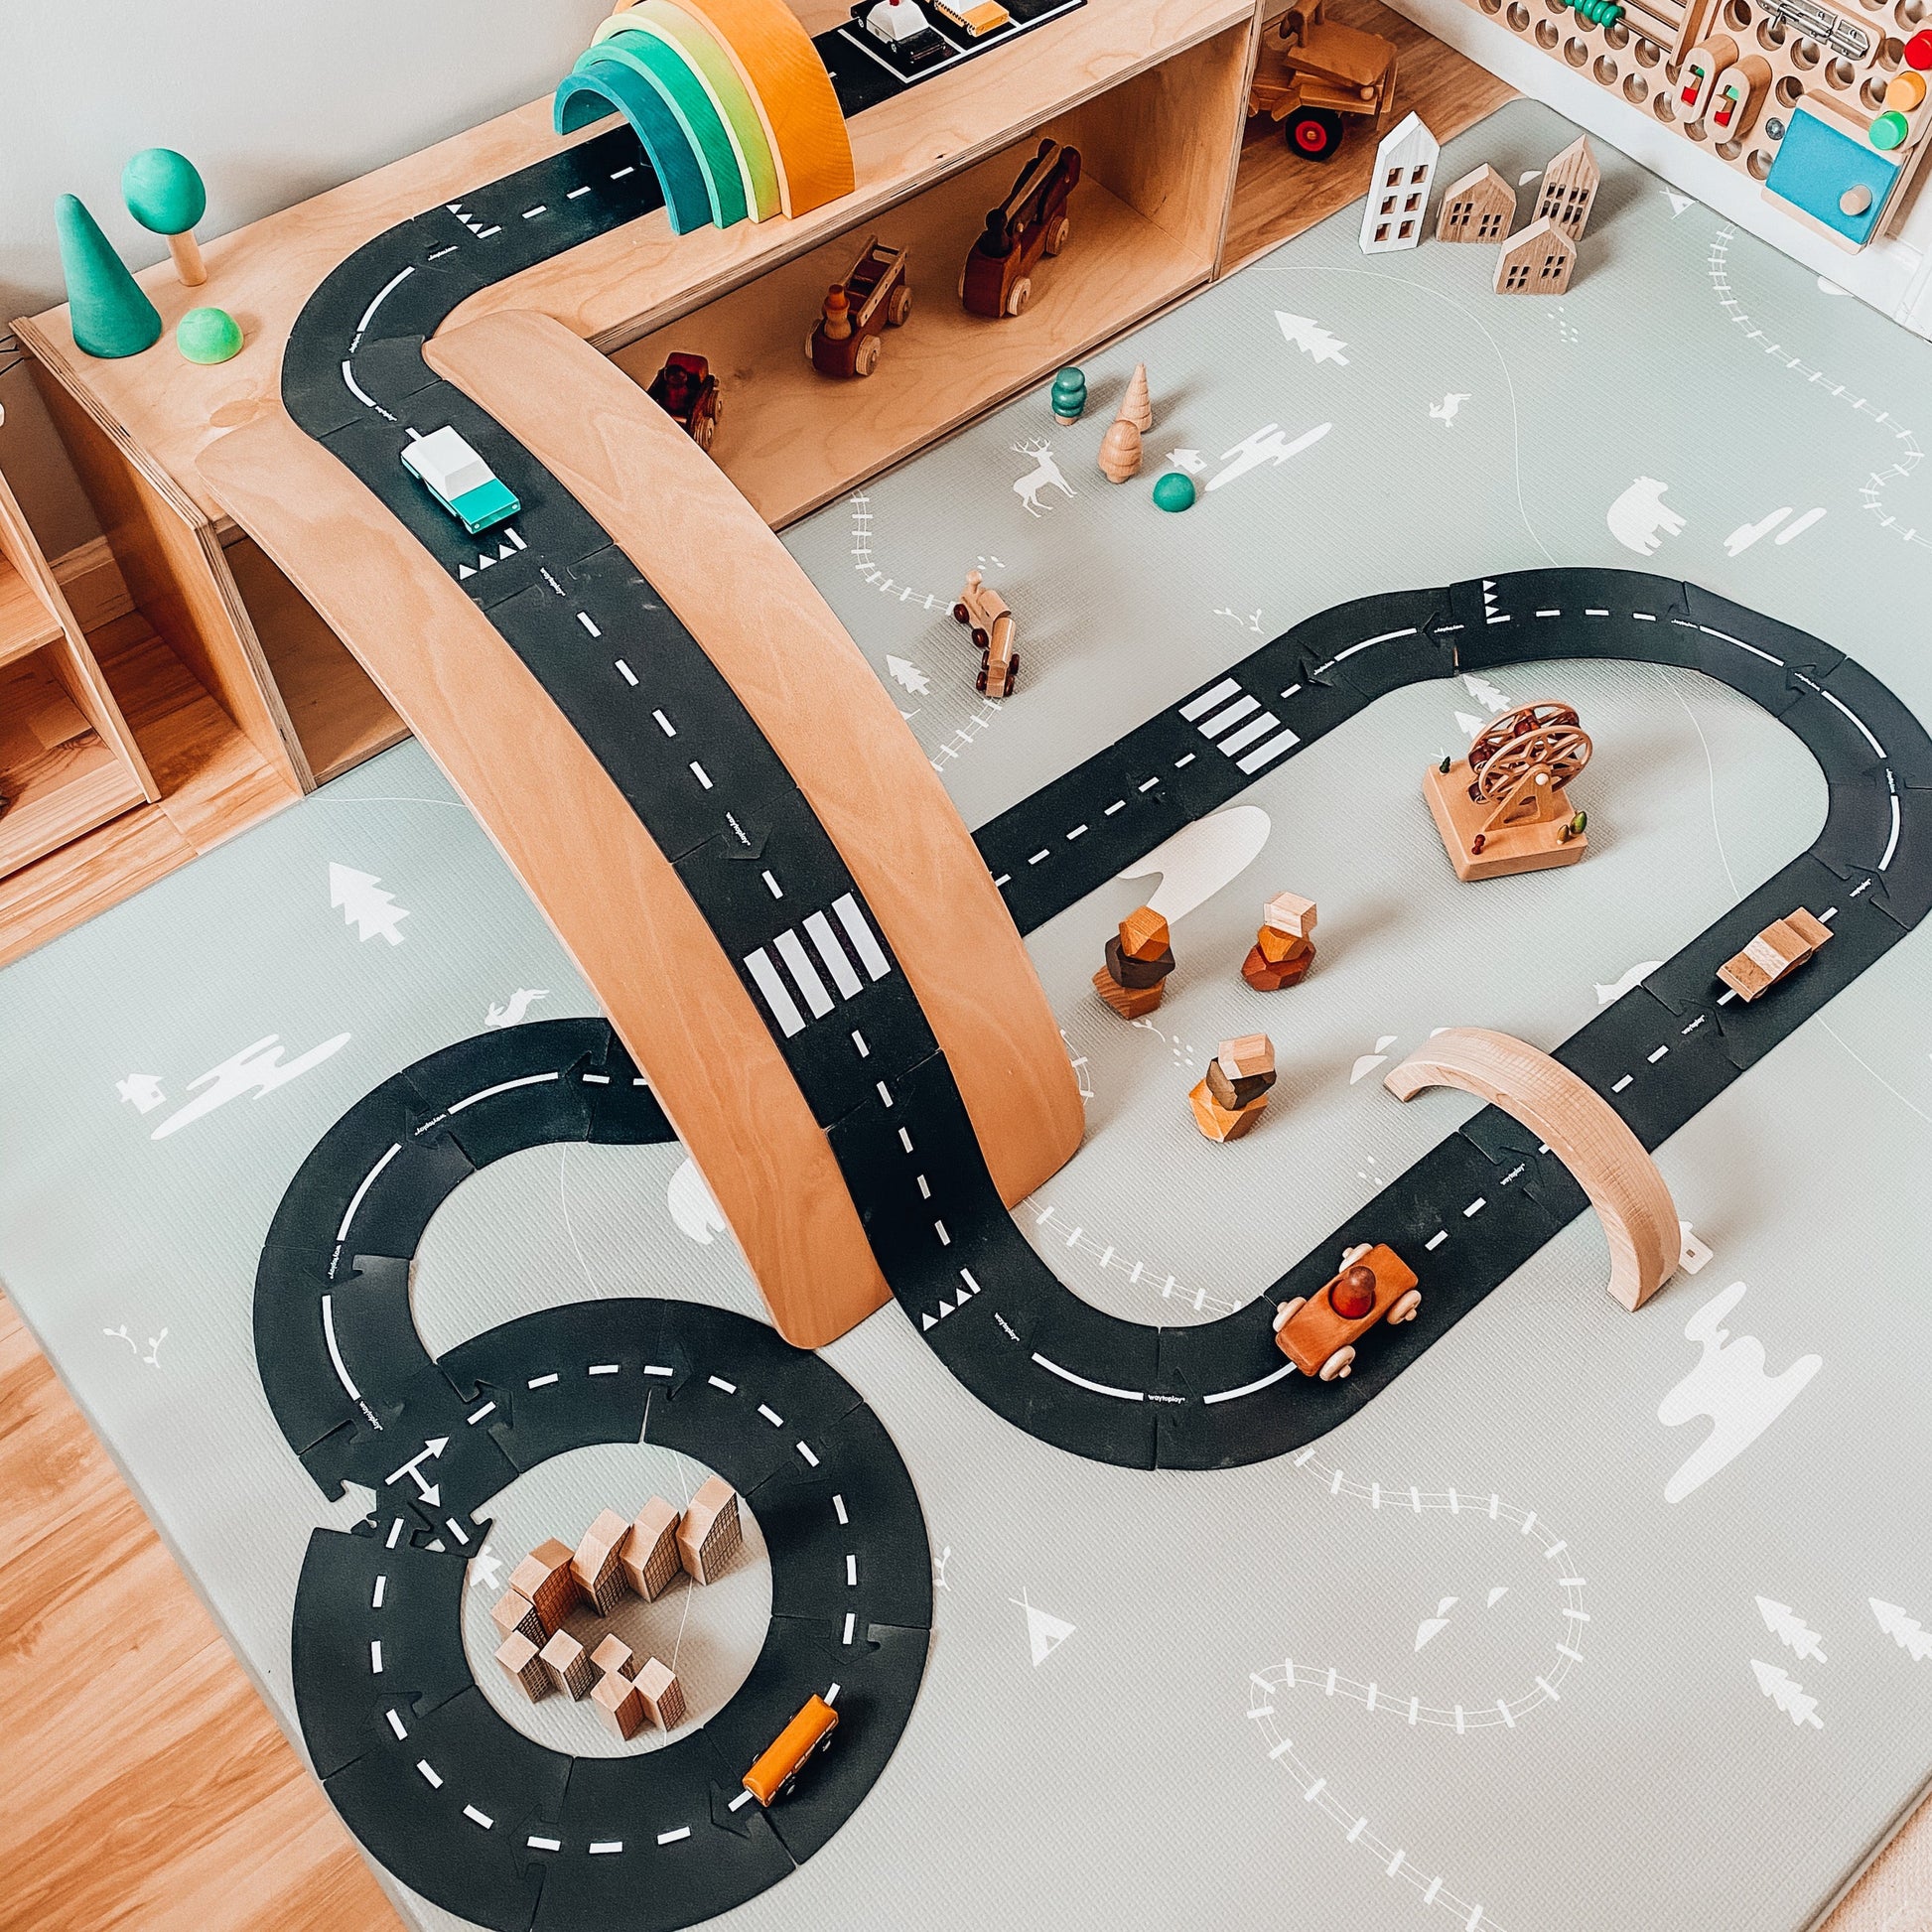 Waytoplay Flexible Toy Road, King Of The Road (40pcs), Way To Play Road